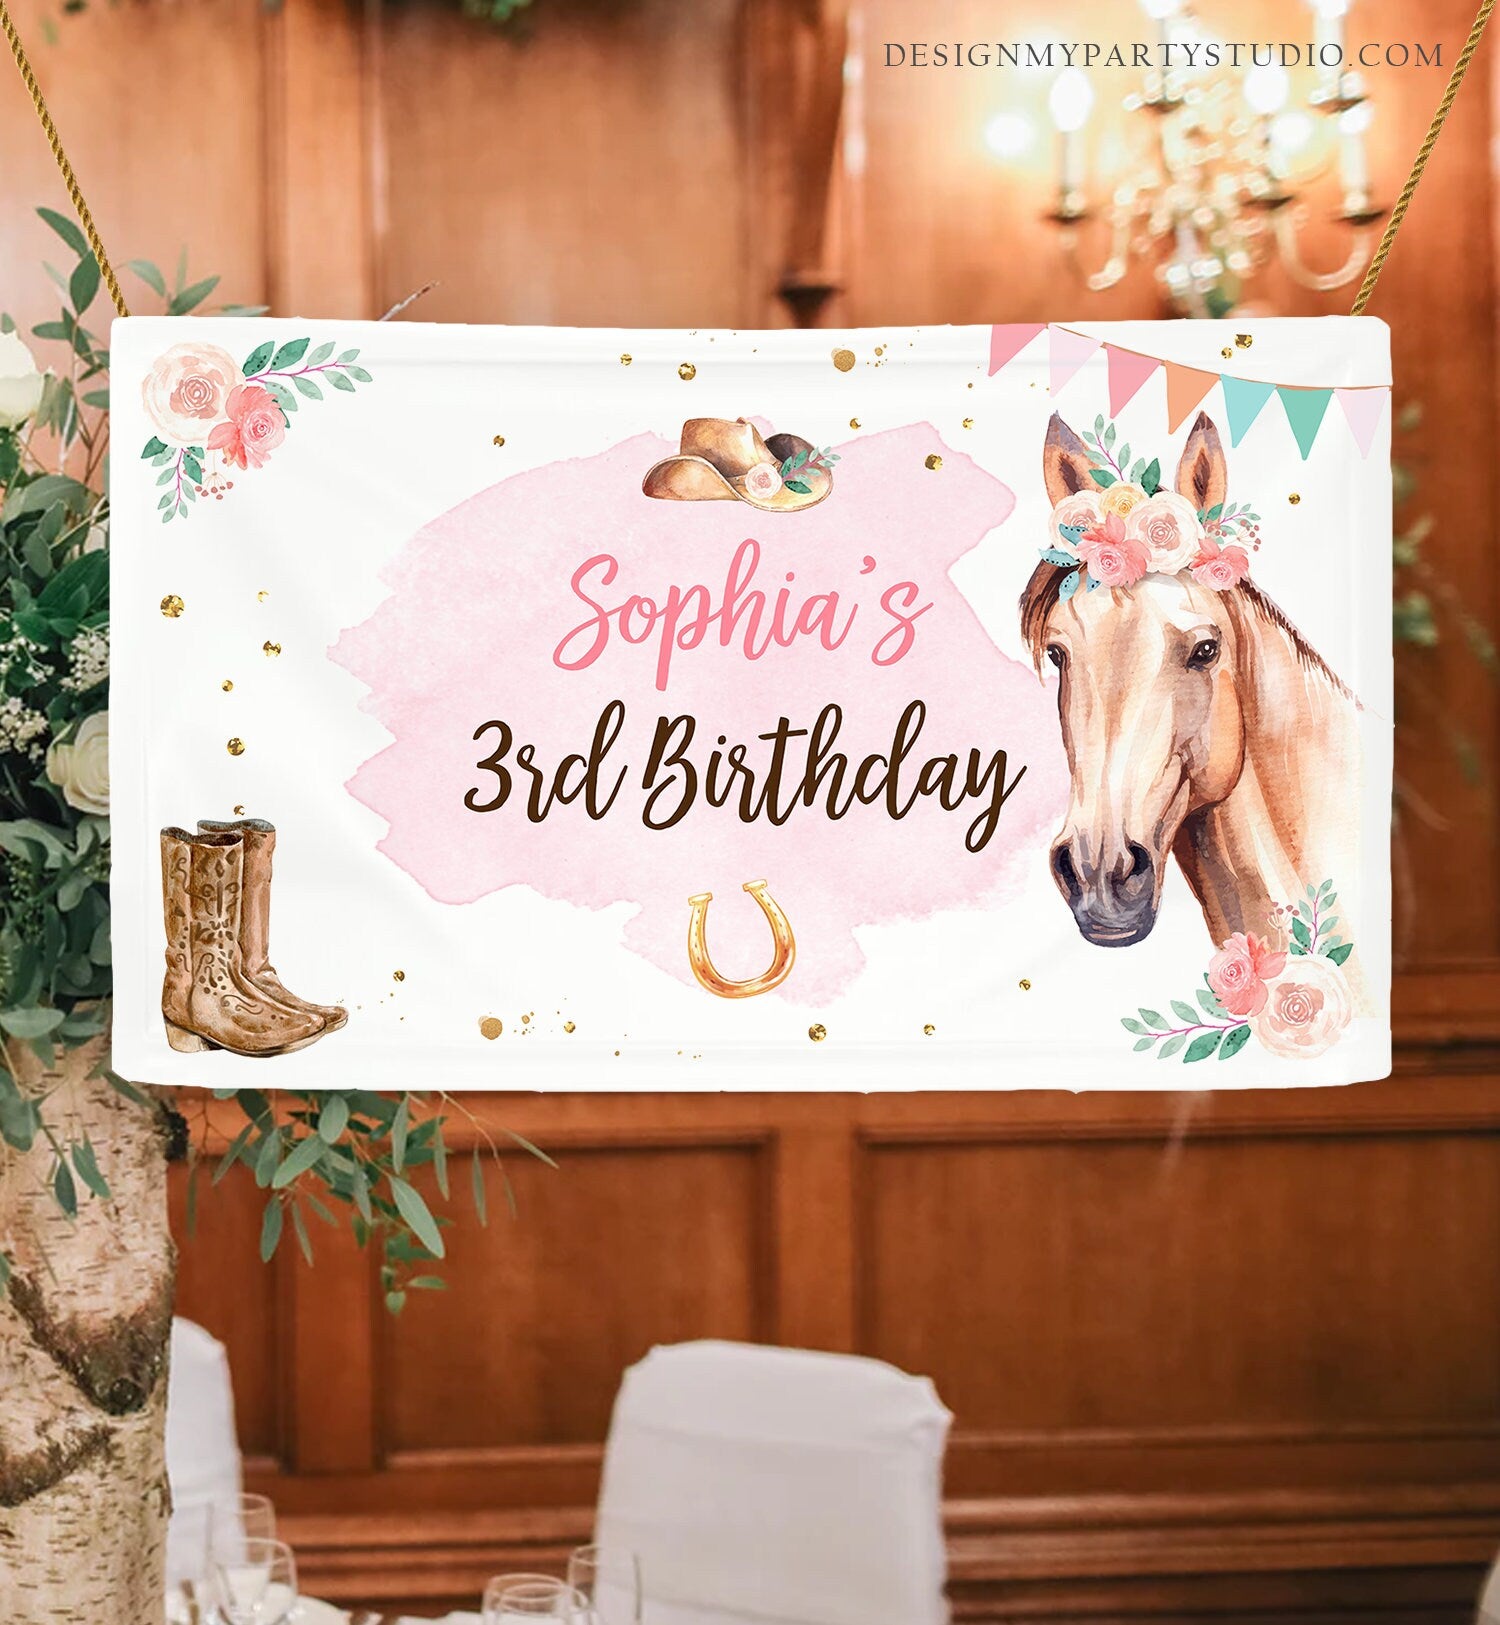 Editable Horse Birthday Backdrop Saddle Up Watercolor Cowgirl Party Girl Pony Birthday Decor Horse Party Sign Corjl Template Printable 0398